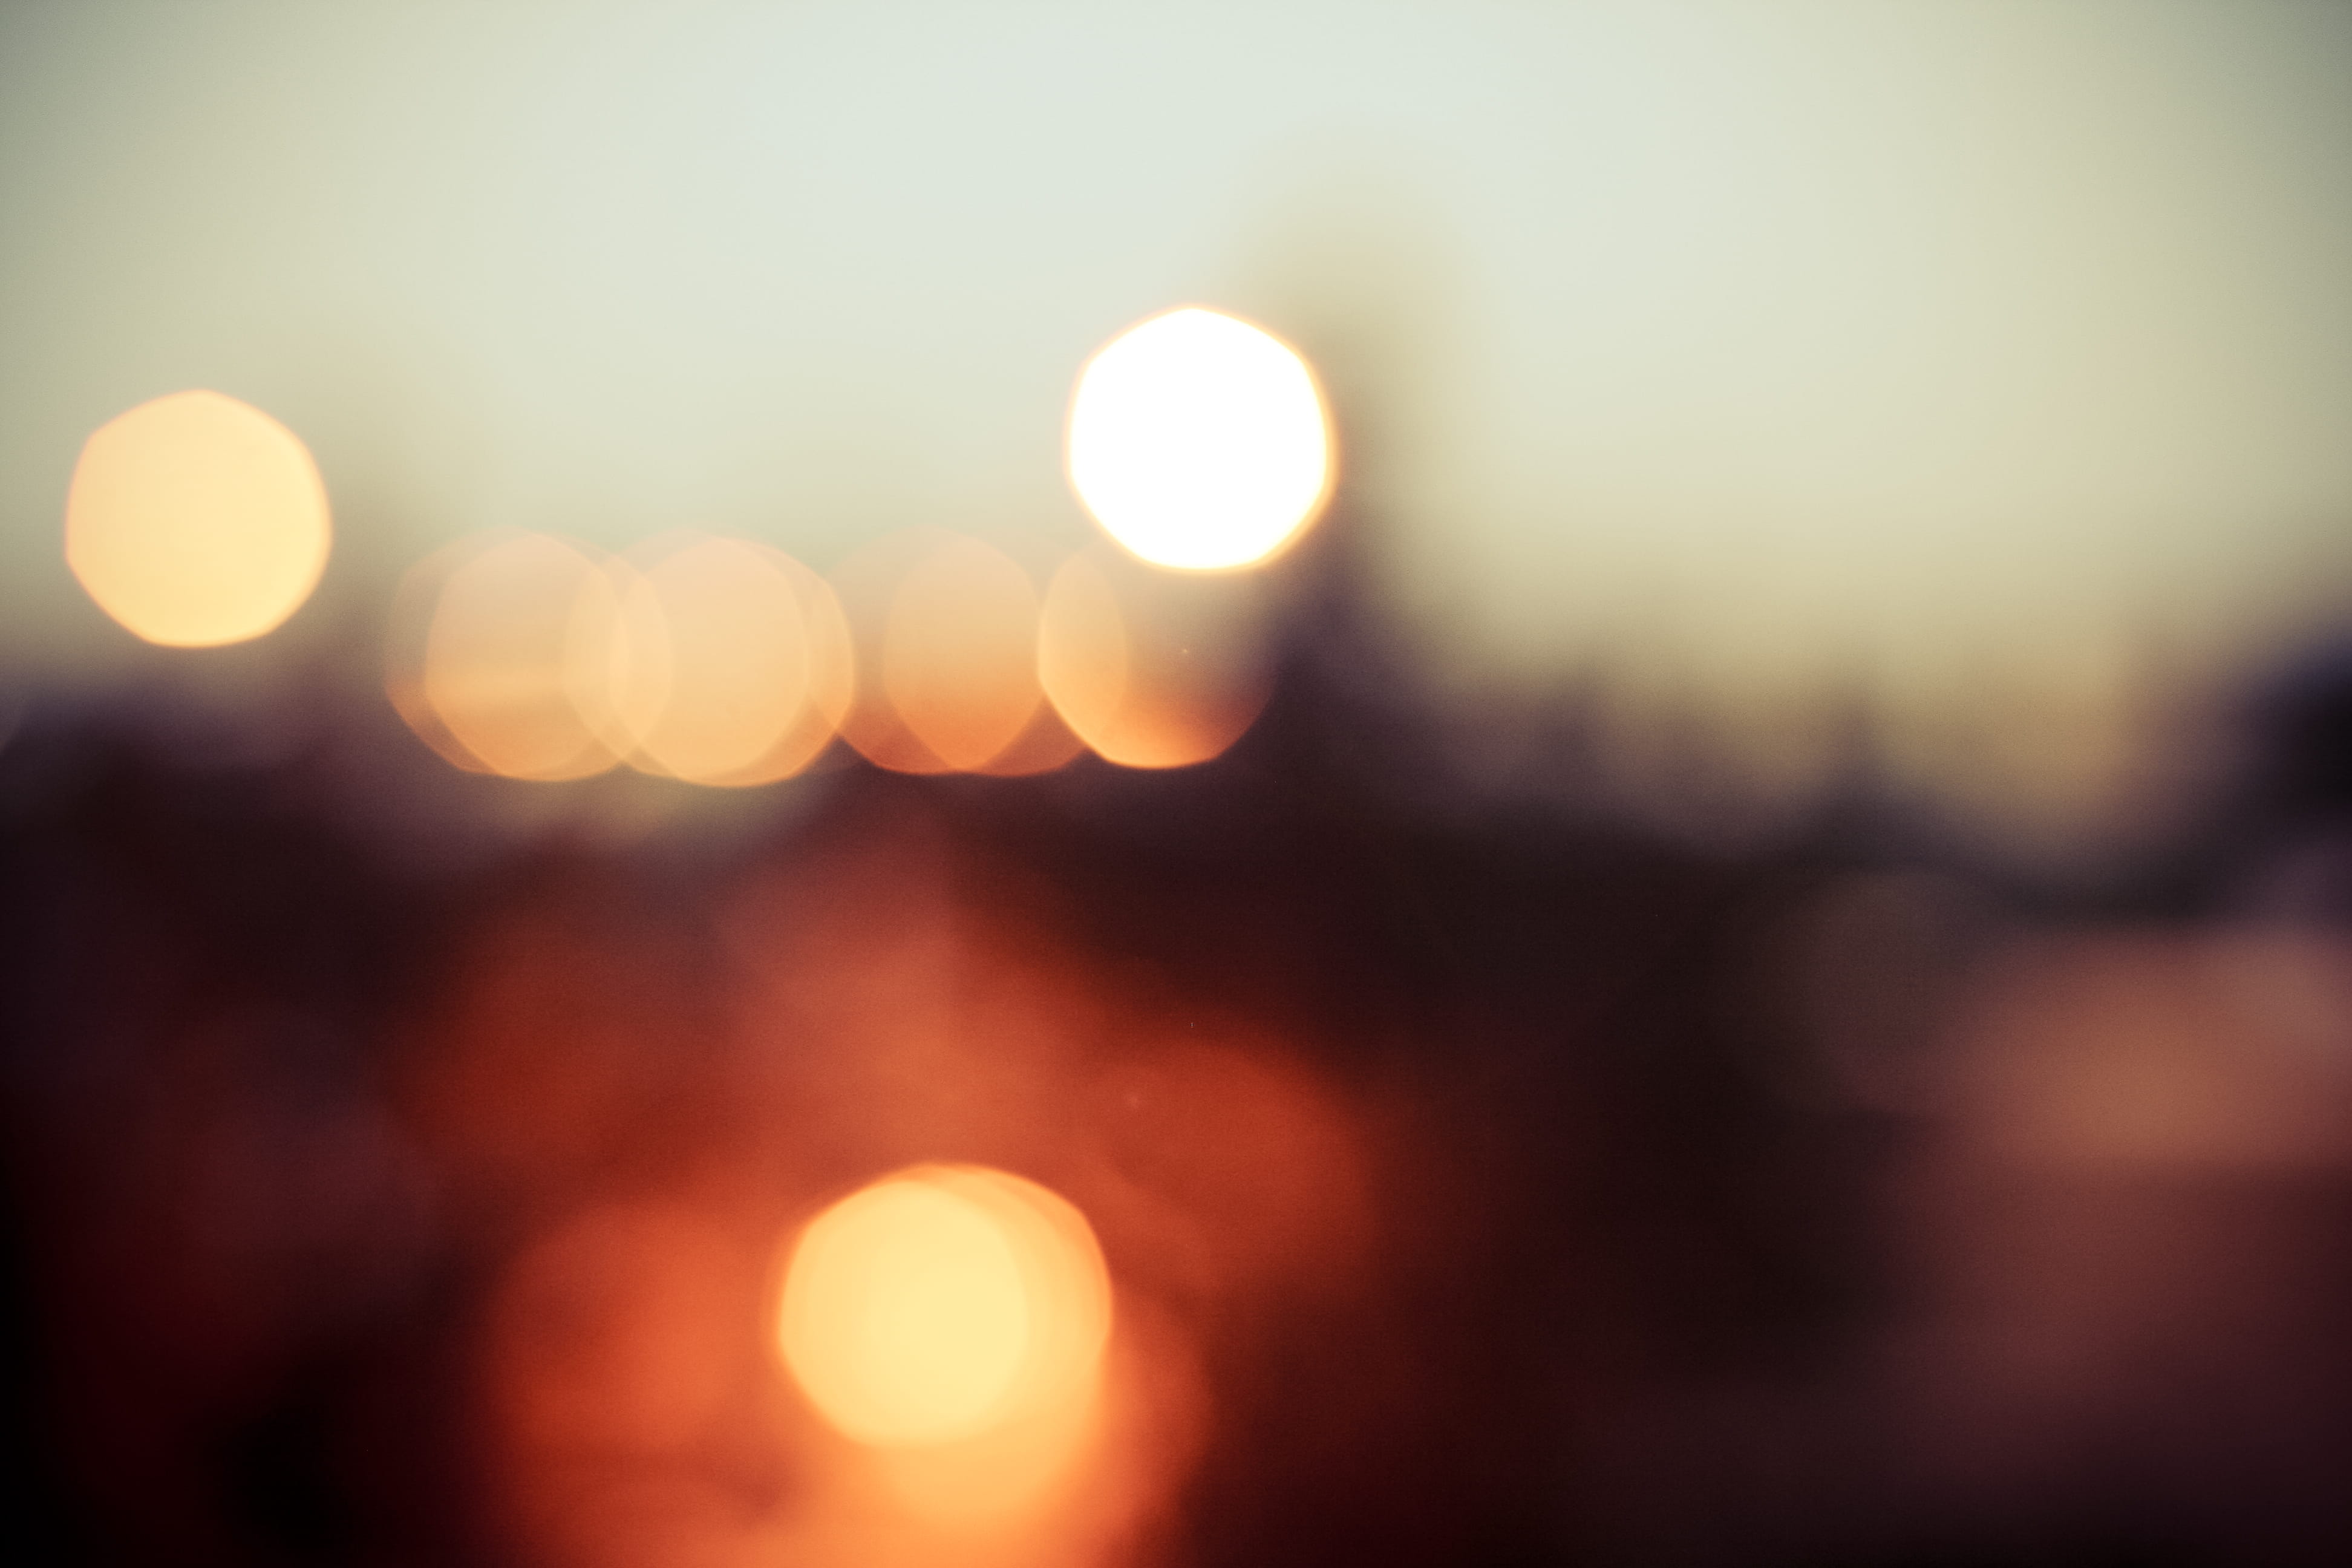 Bokeh Time vol. 2, lights, defocused, abstract, backgrounds, night